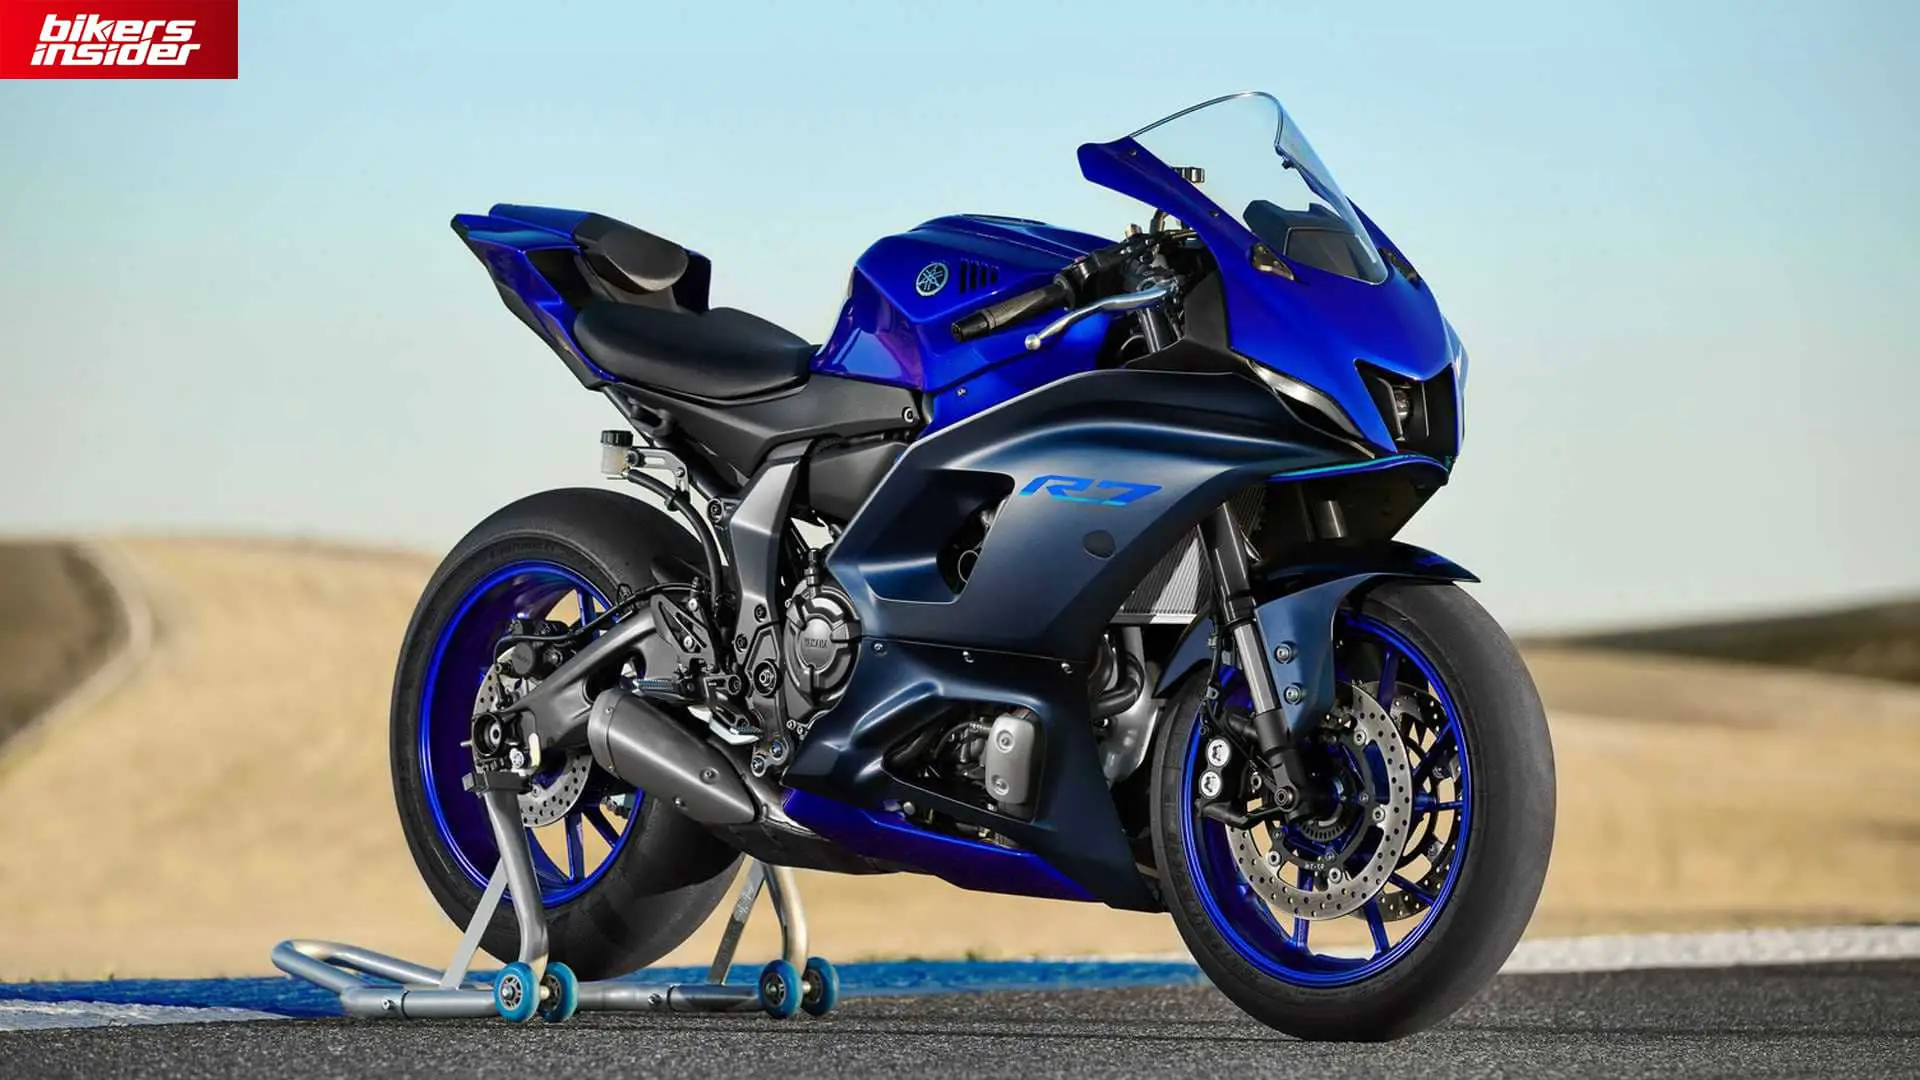 2022 Yamaha R7 Launches In June!